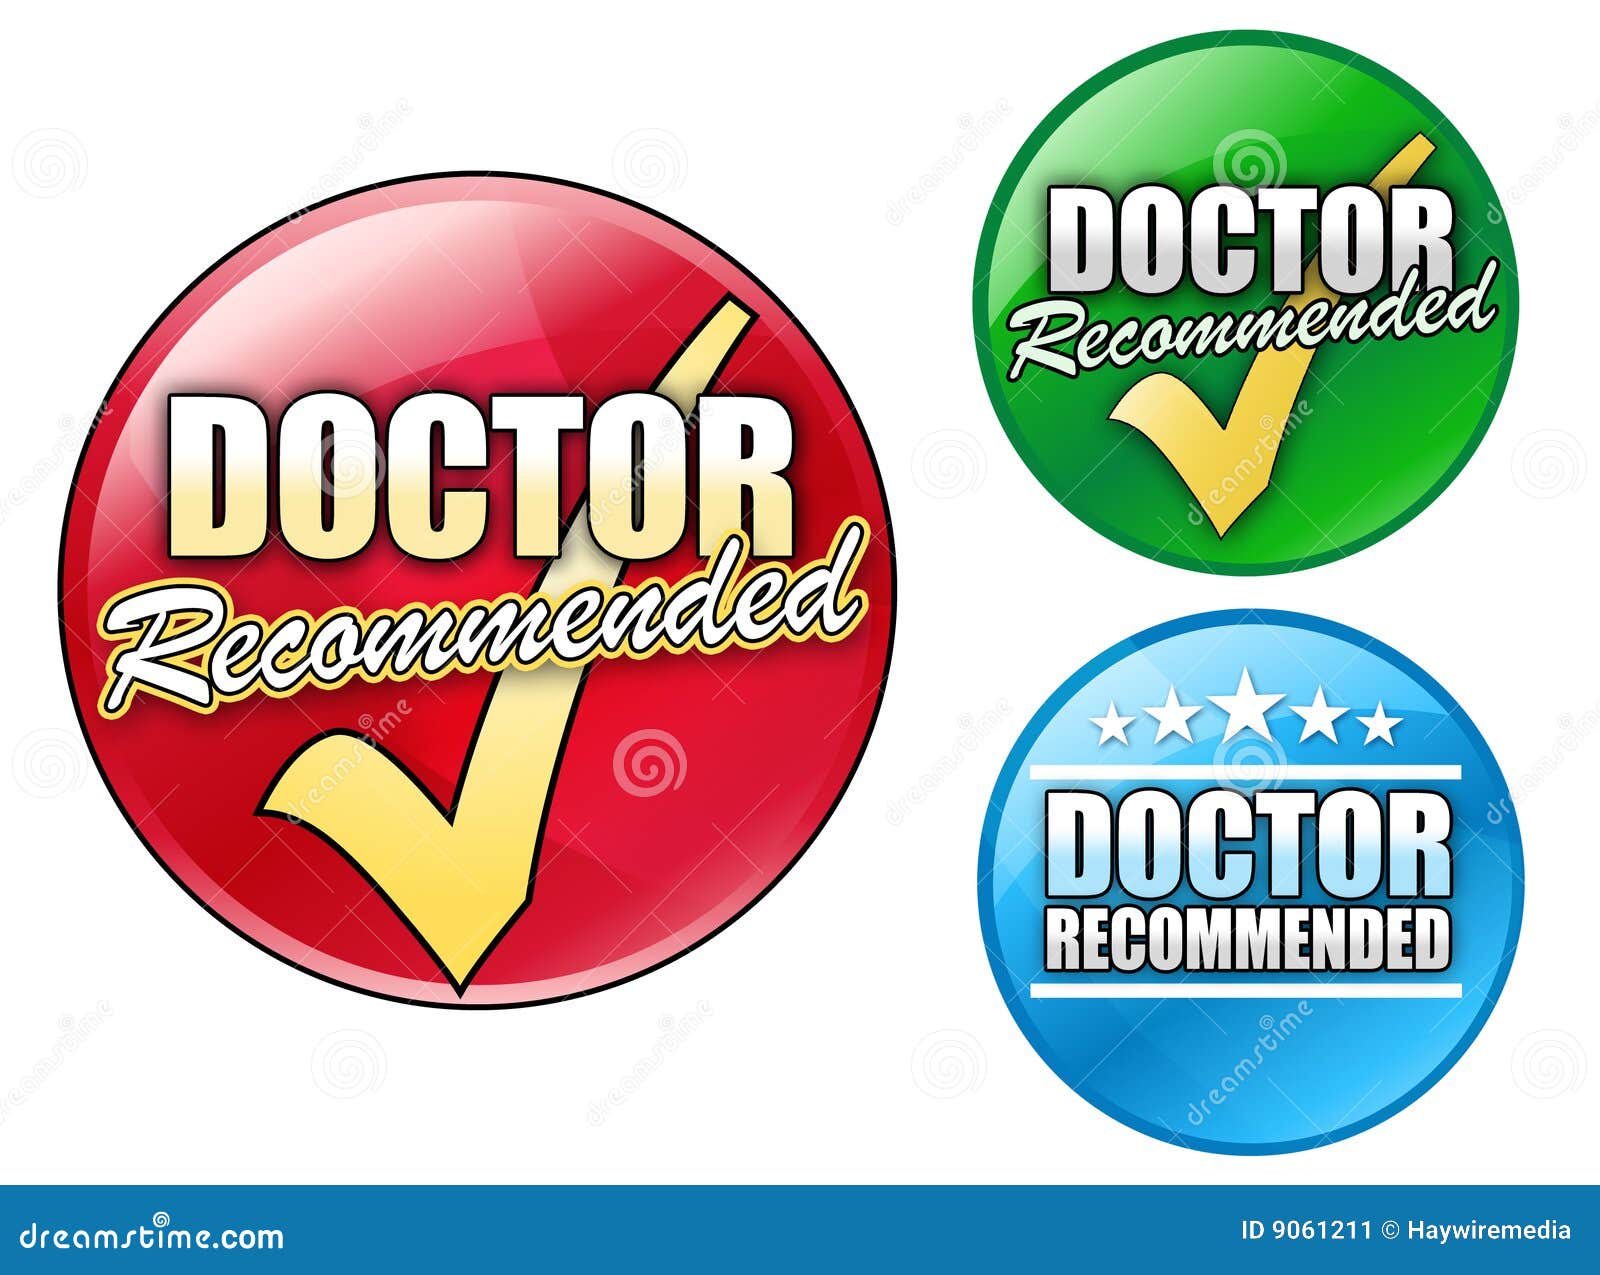 Doctor Recommended Logo Circles Stock Image - Image: 9061211